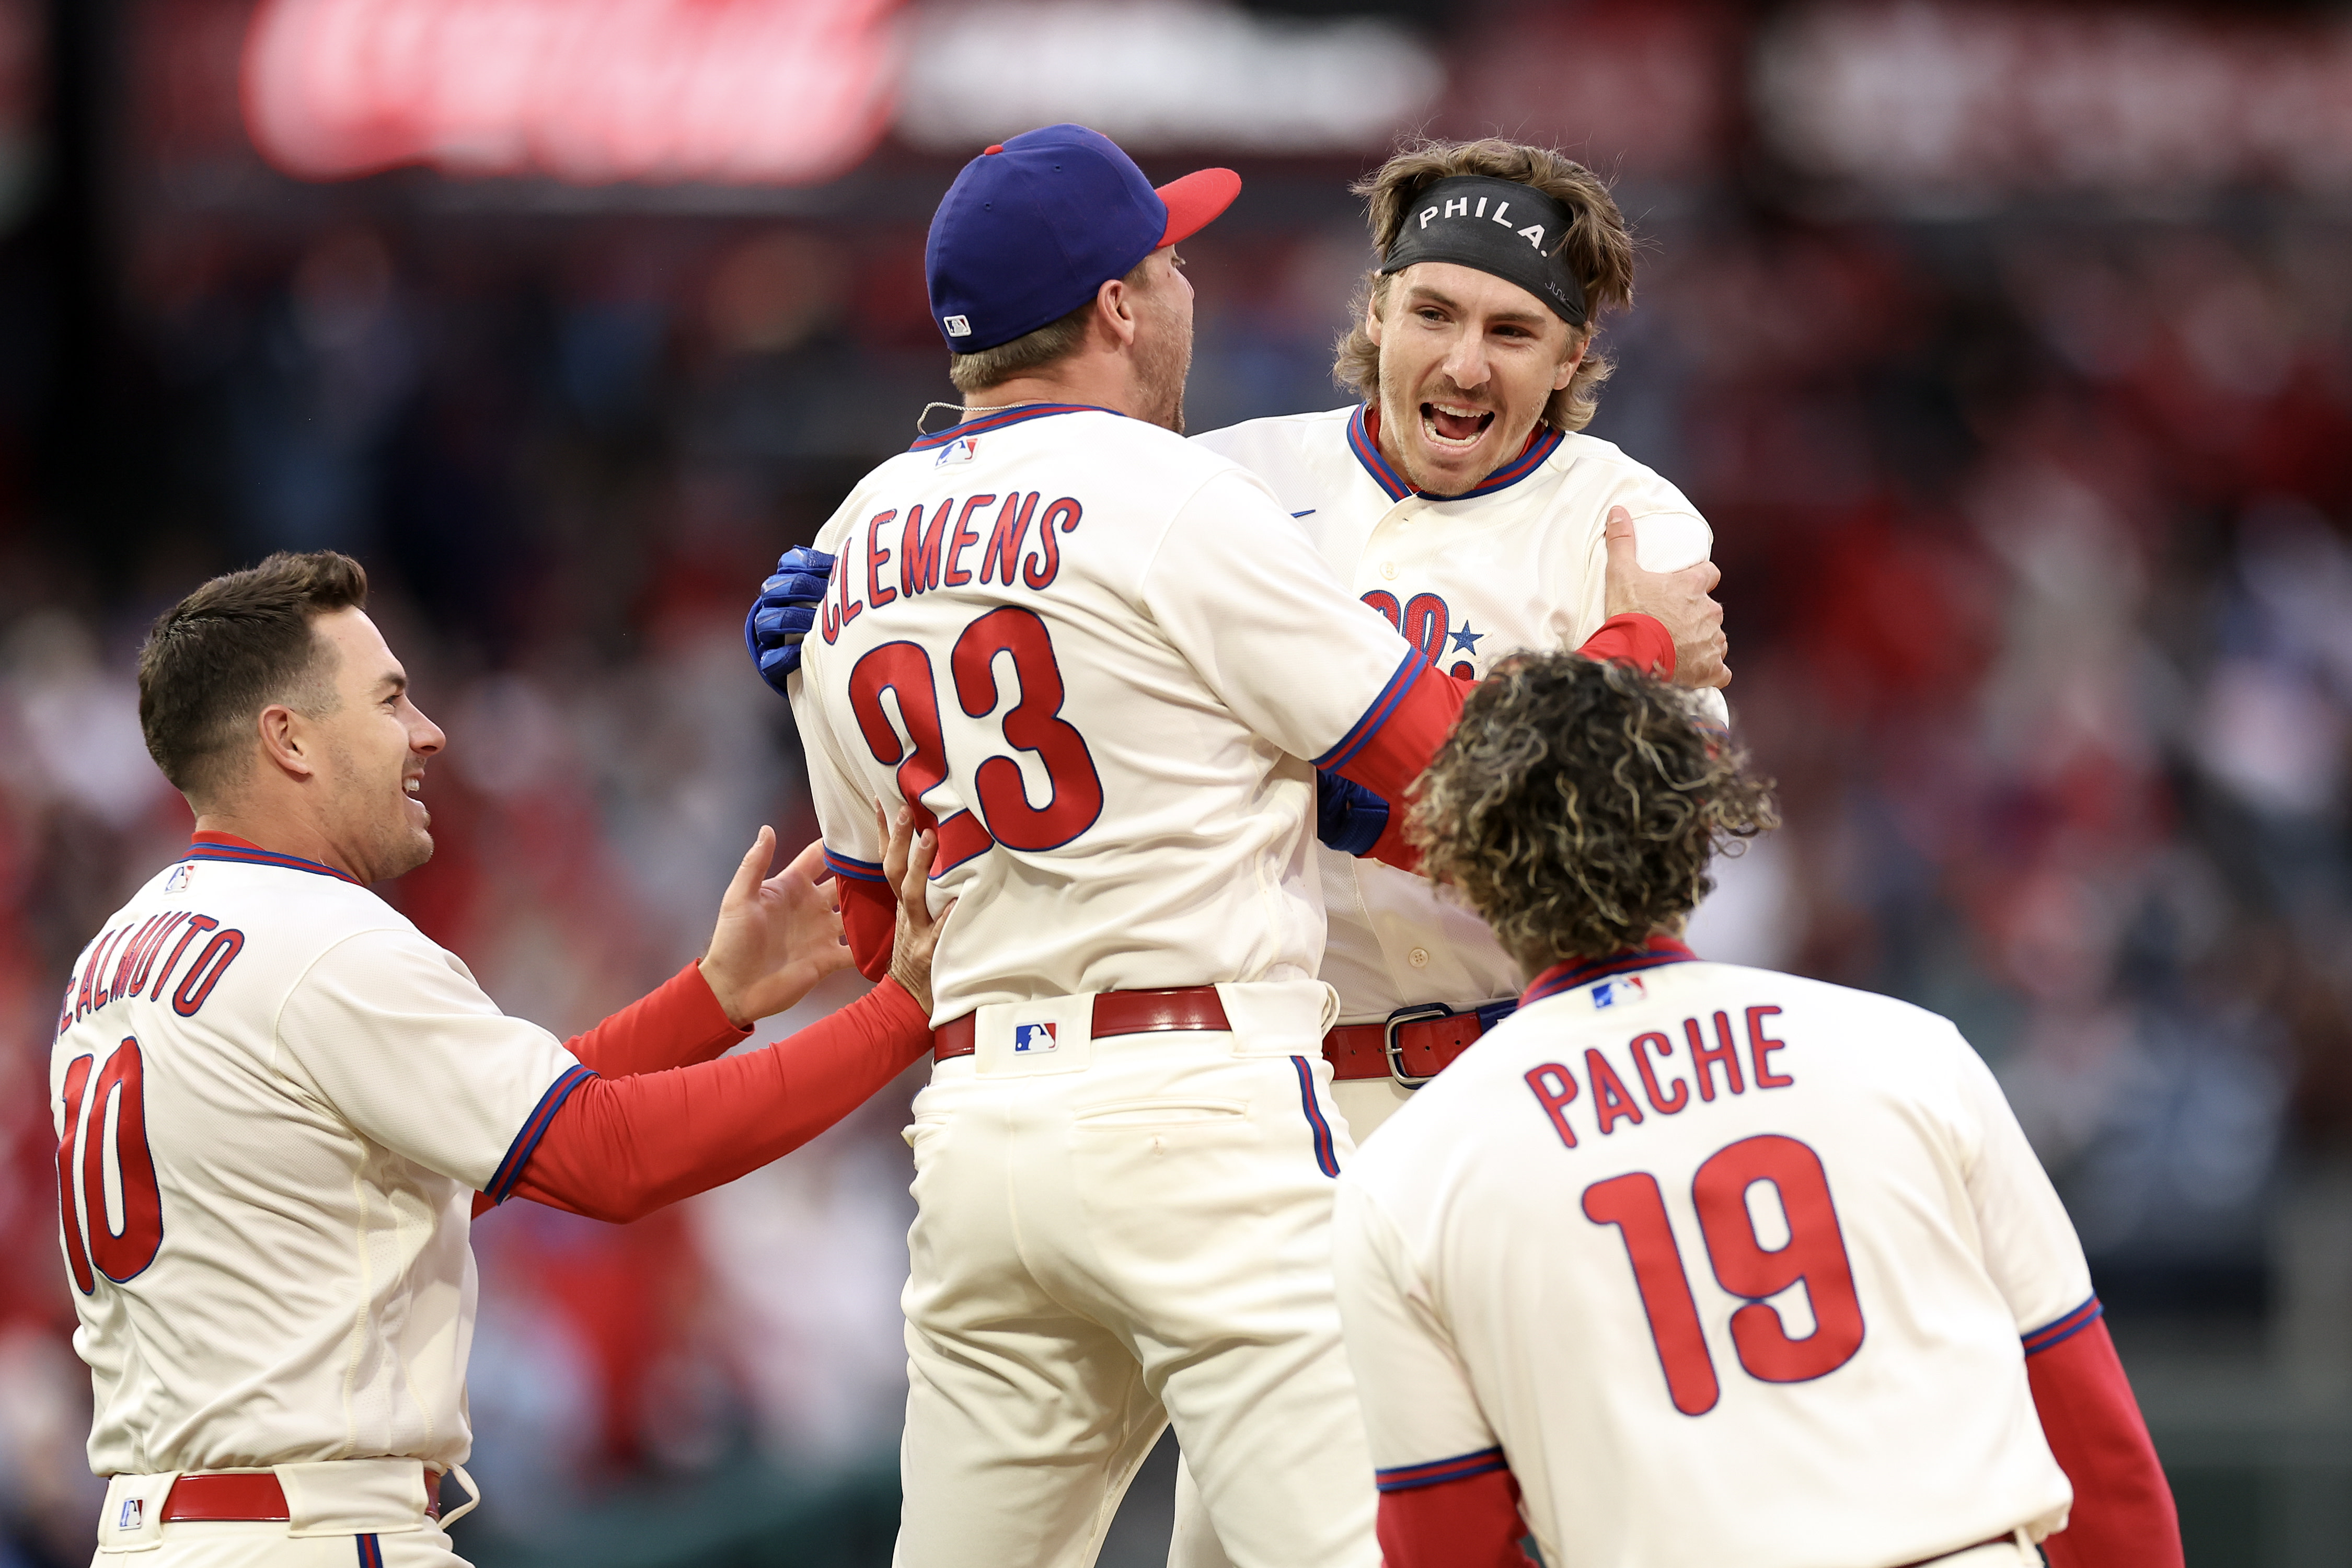 Stott caps 3-run 9th with RBI single, Phillies top Reds 3-2